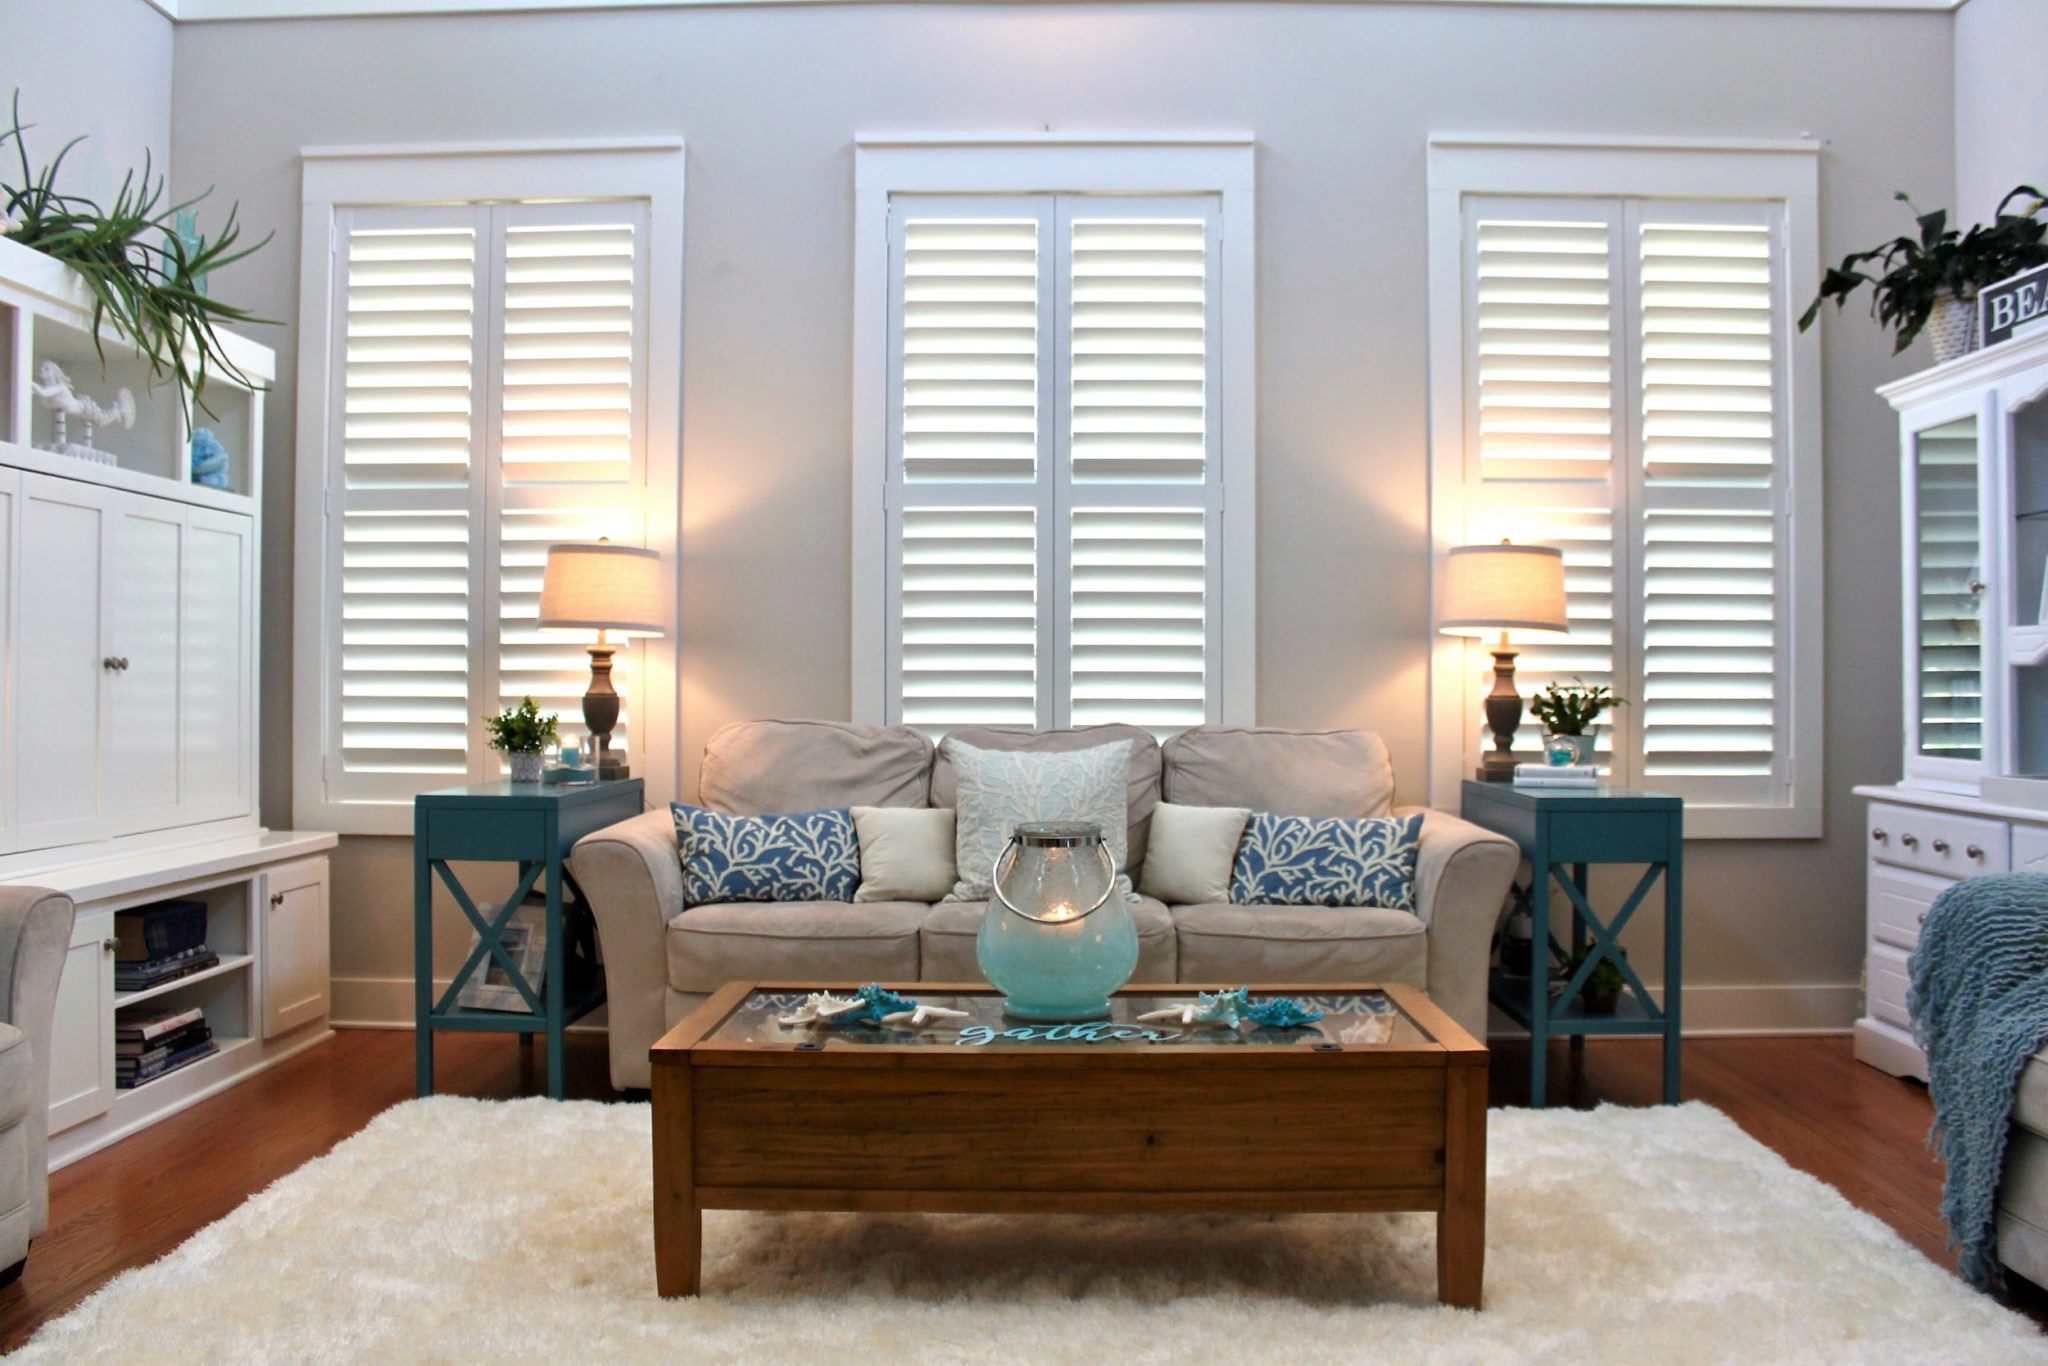 White shutters in a living room